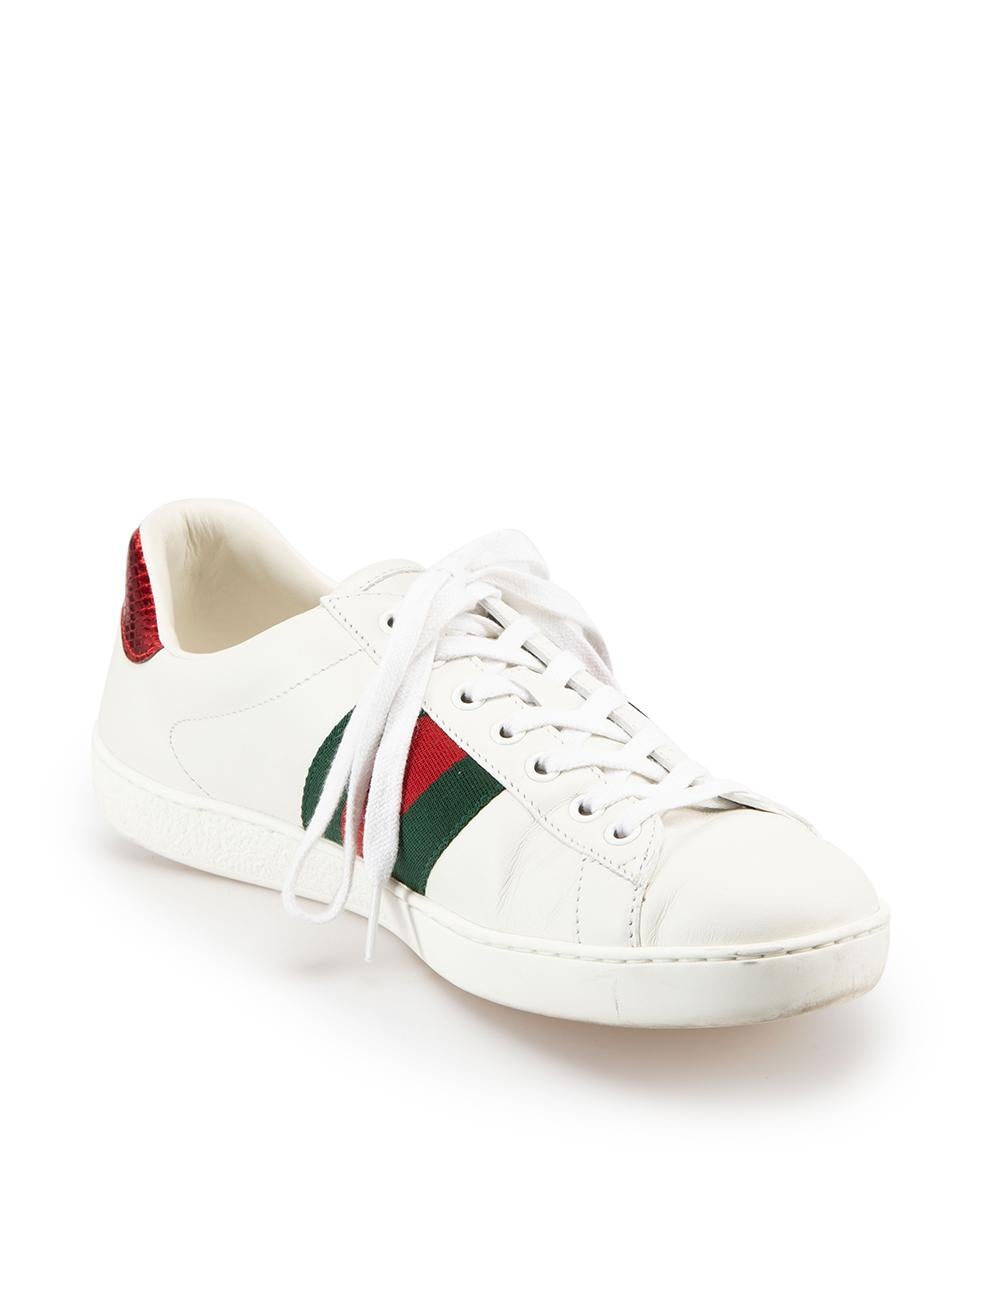 CONDITION is Very good. Minimal wear to shoes is evident. Minimal wear to the rubber sole trims on both shoes with scuff marks on this used Gucci designer resale item. These shoes come with original box and dust bags.



Details


White

Red and